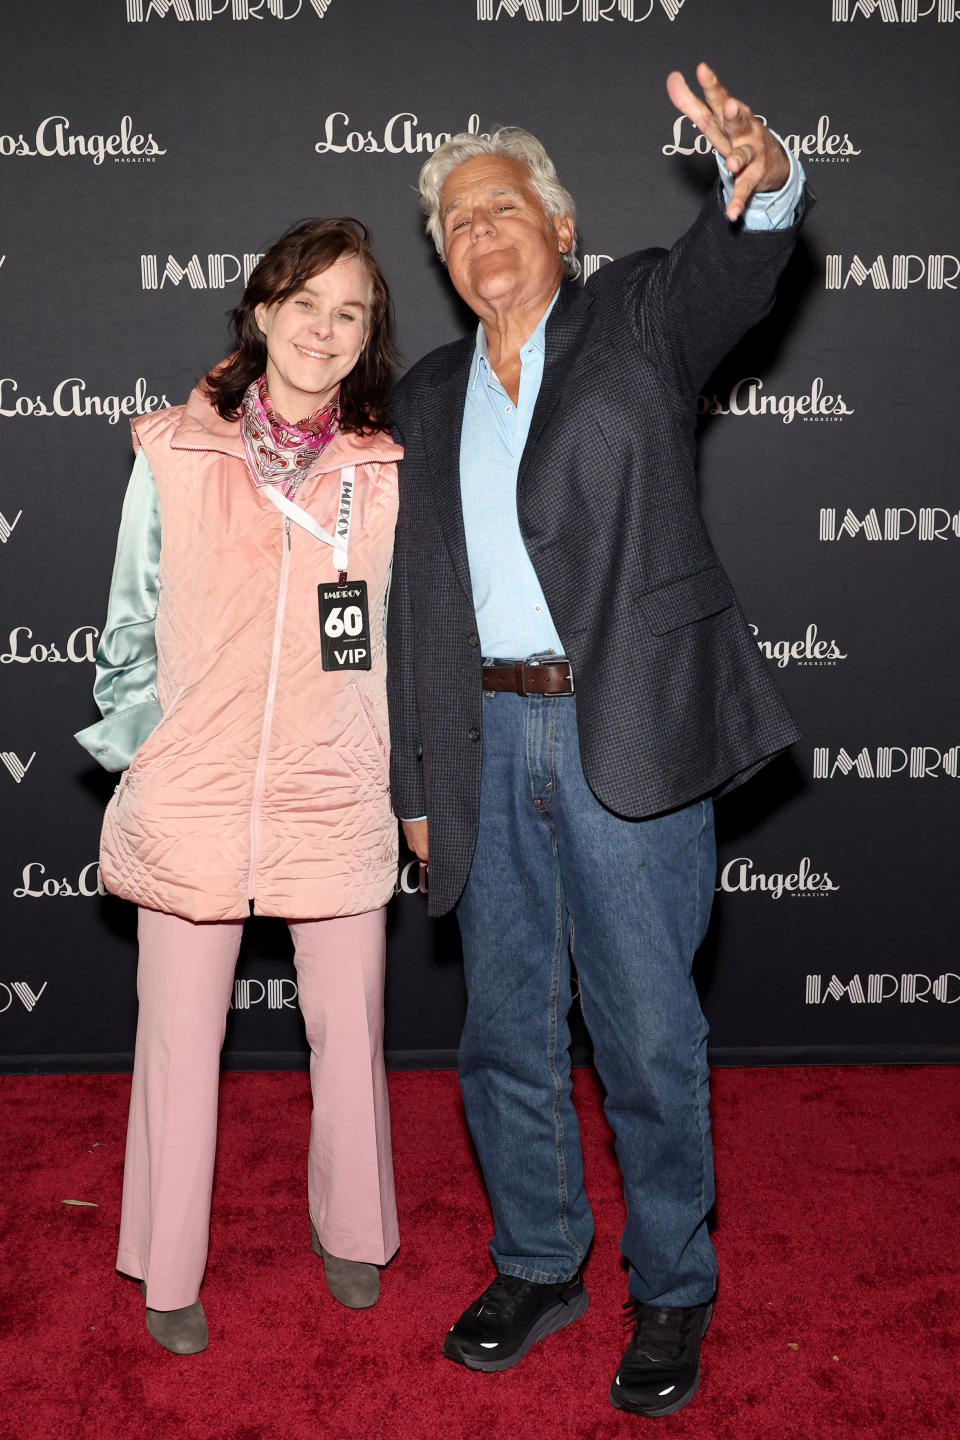 Jay and Mavis Leno attend the 60th Anniversary at The Improv at Hollywood Improv in L.A.